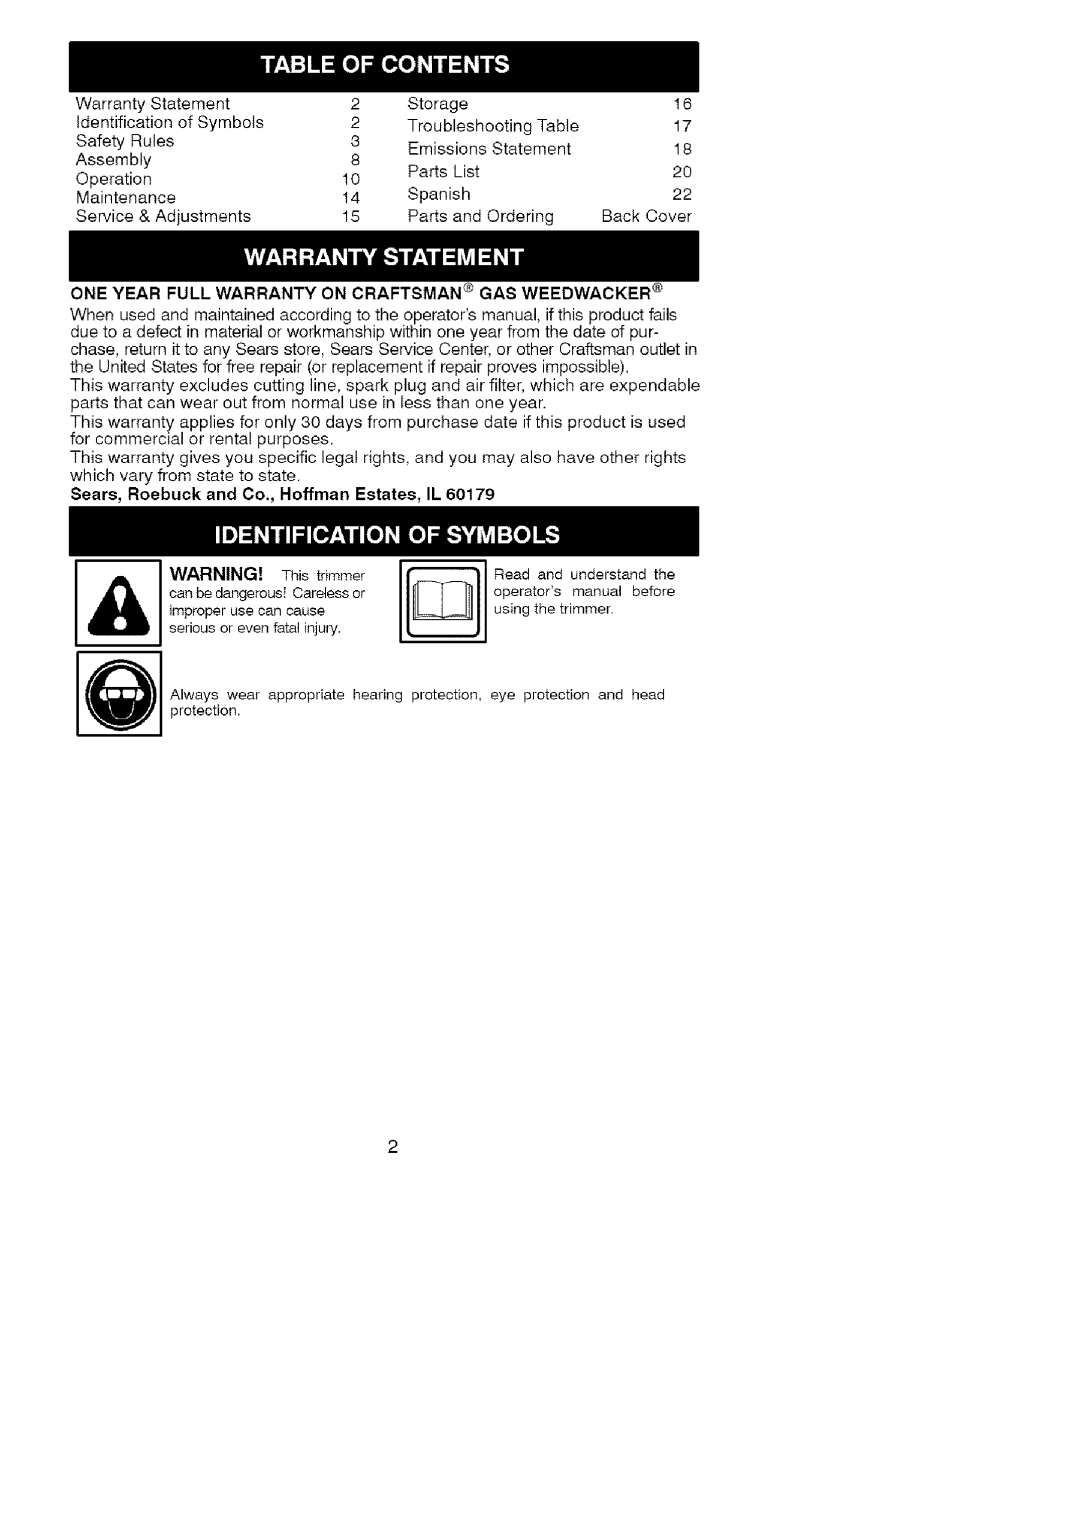 Craftsman 358.791071 operating instructions Sears, Roebuck and Co., Hoffman Estates, IL 